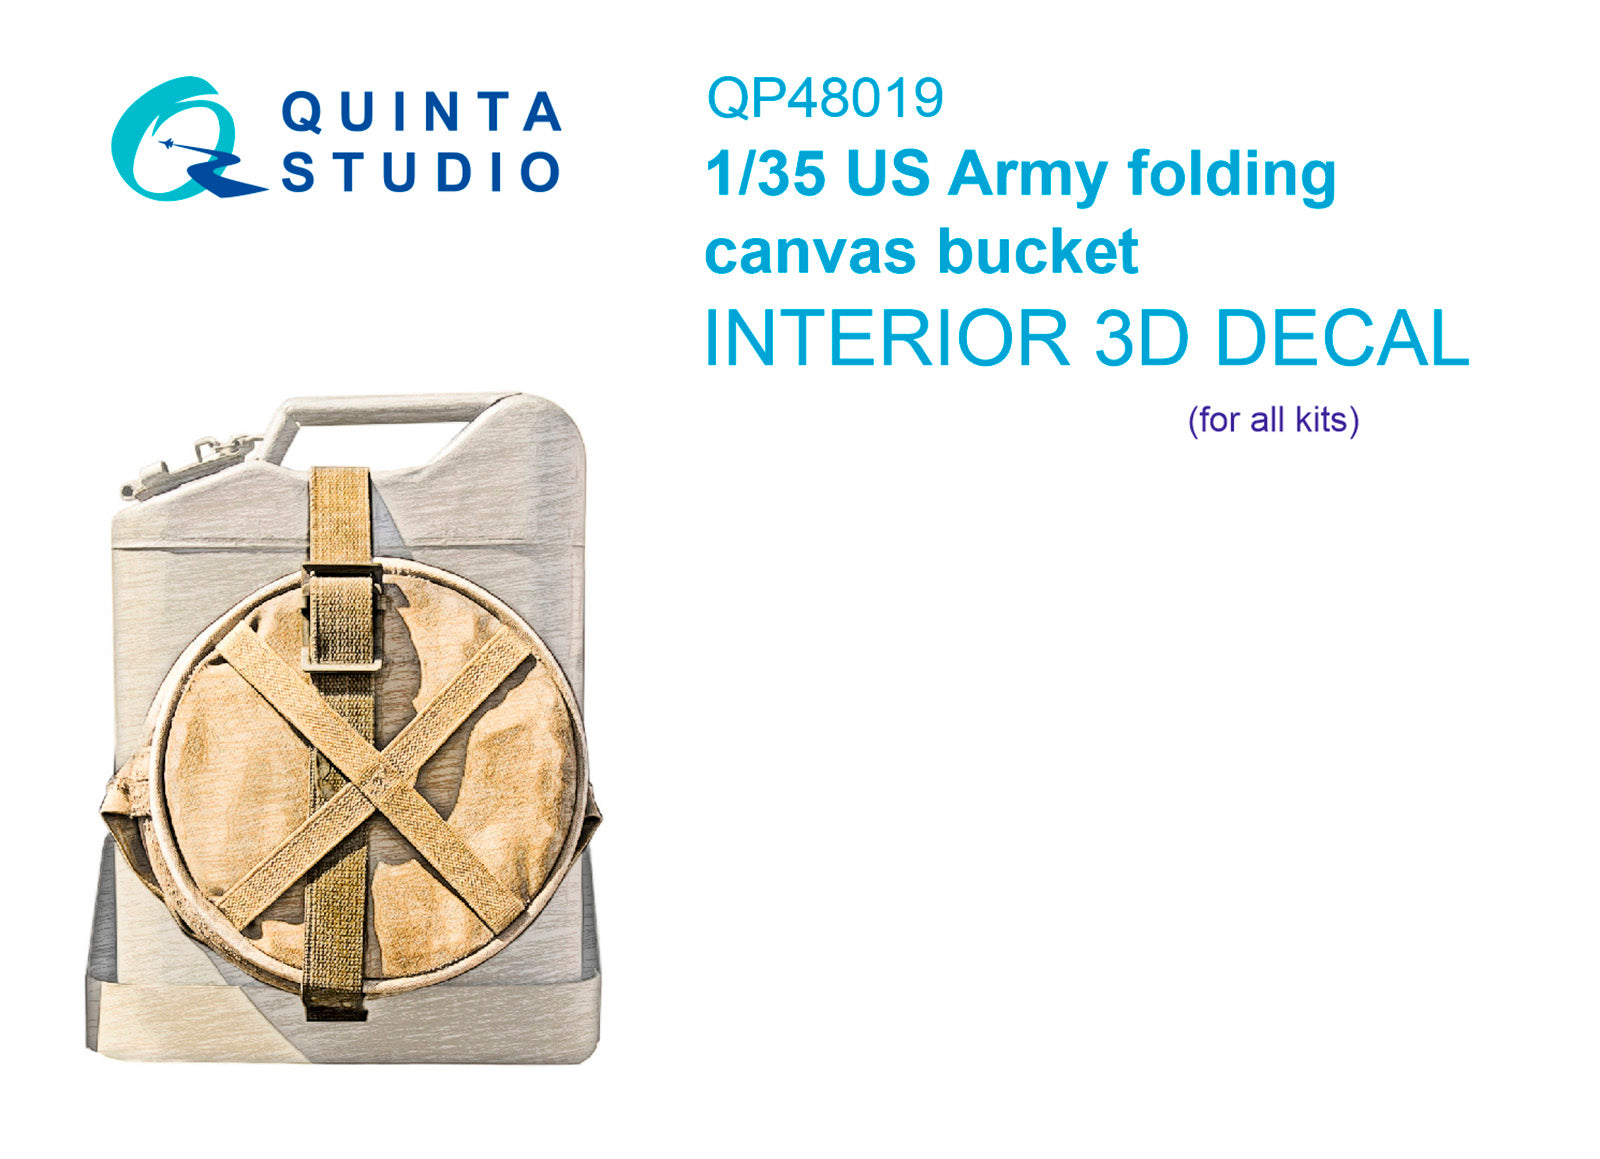 Quinta Studio - 1/48 US Army folding canvas bucket - QP48019 for all kits